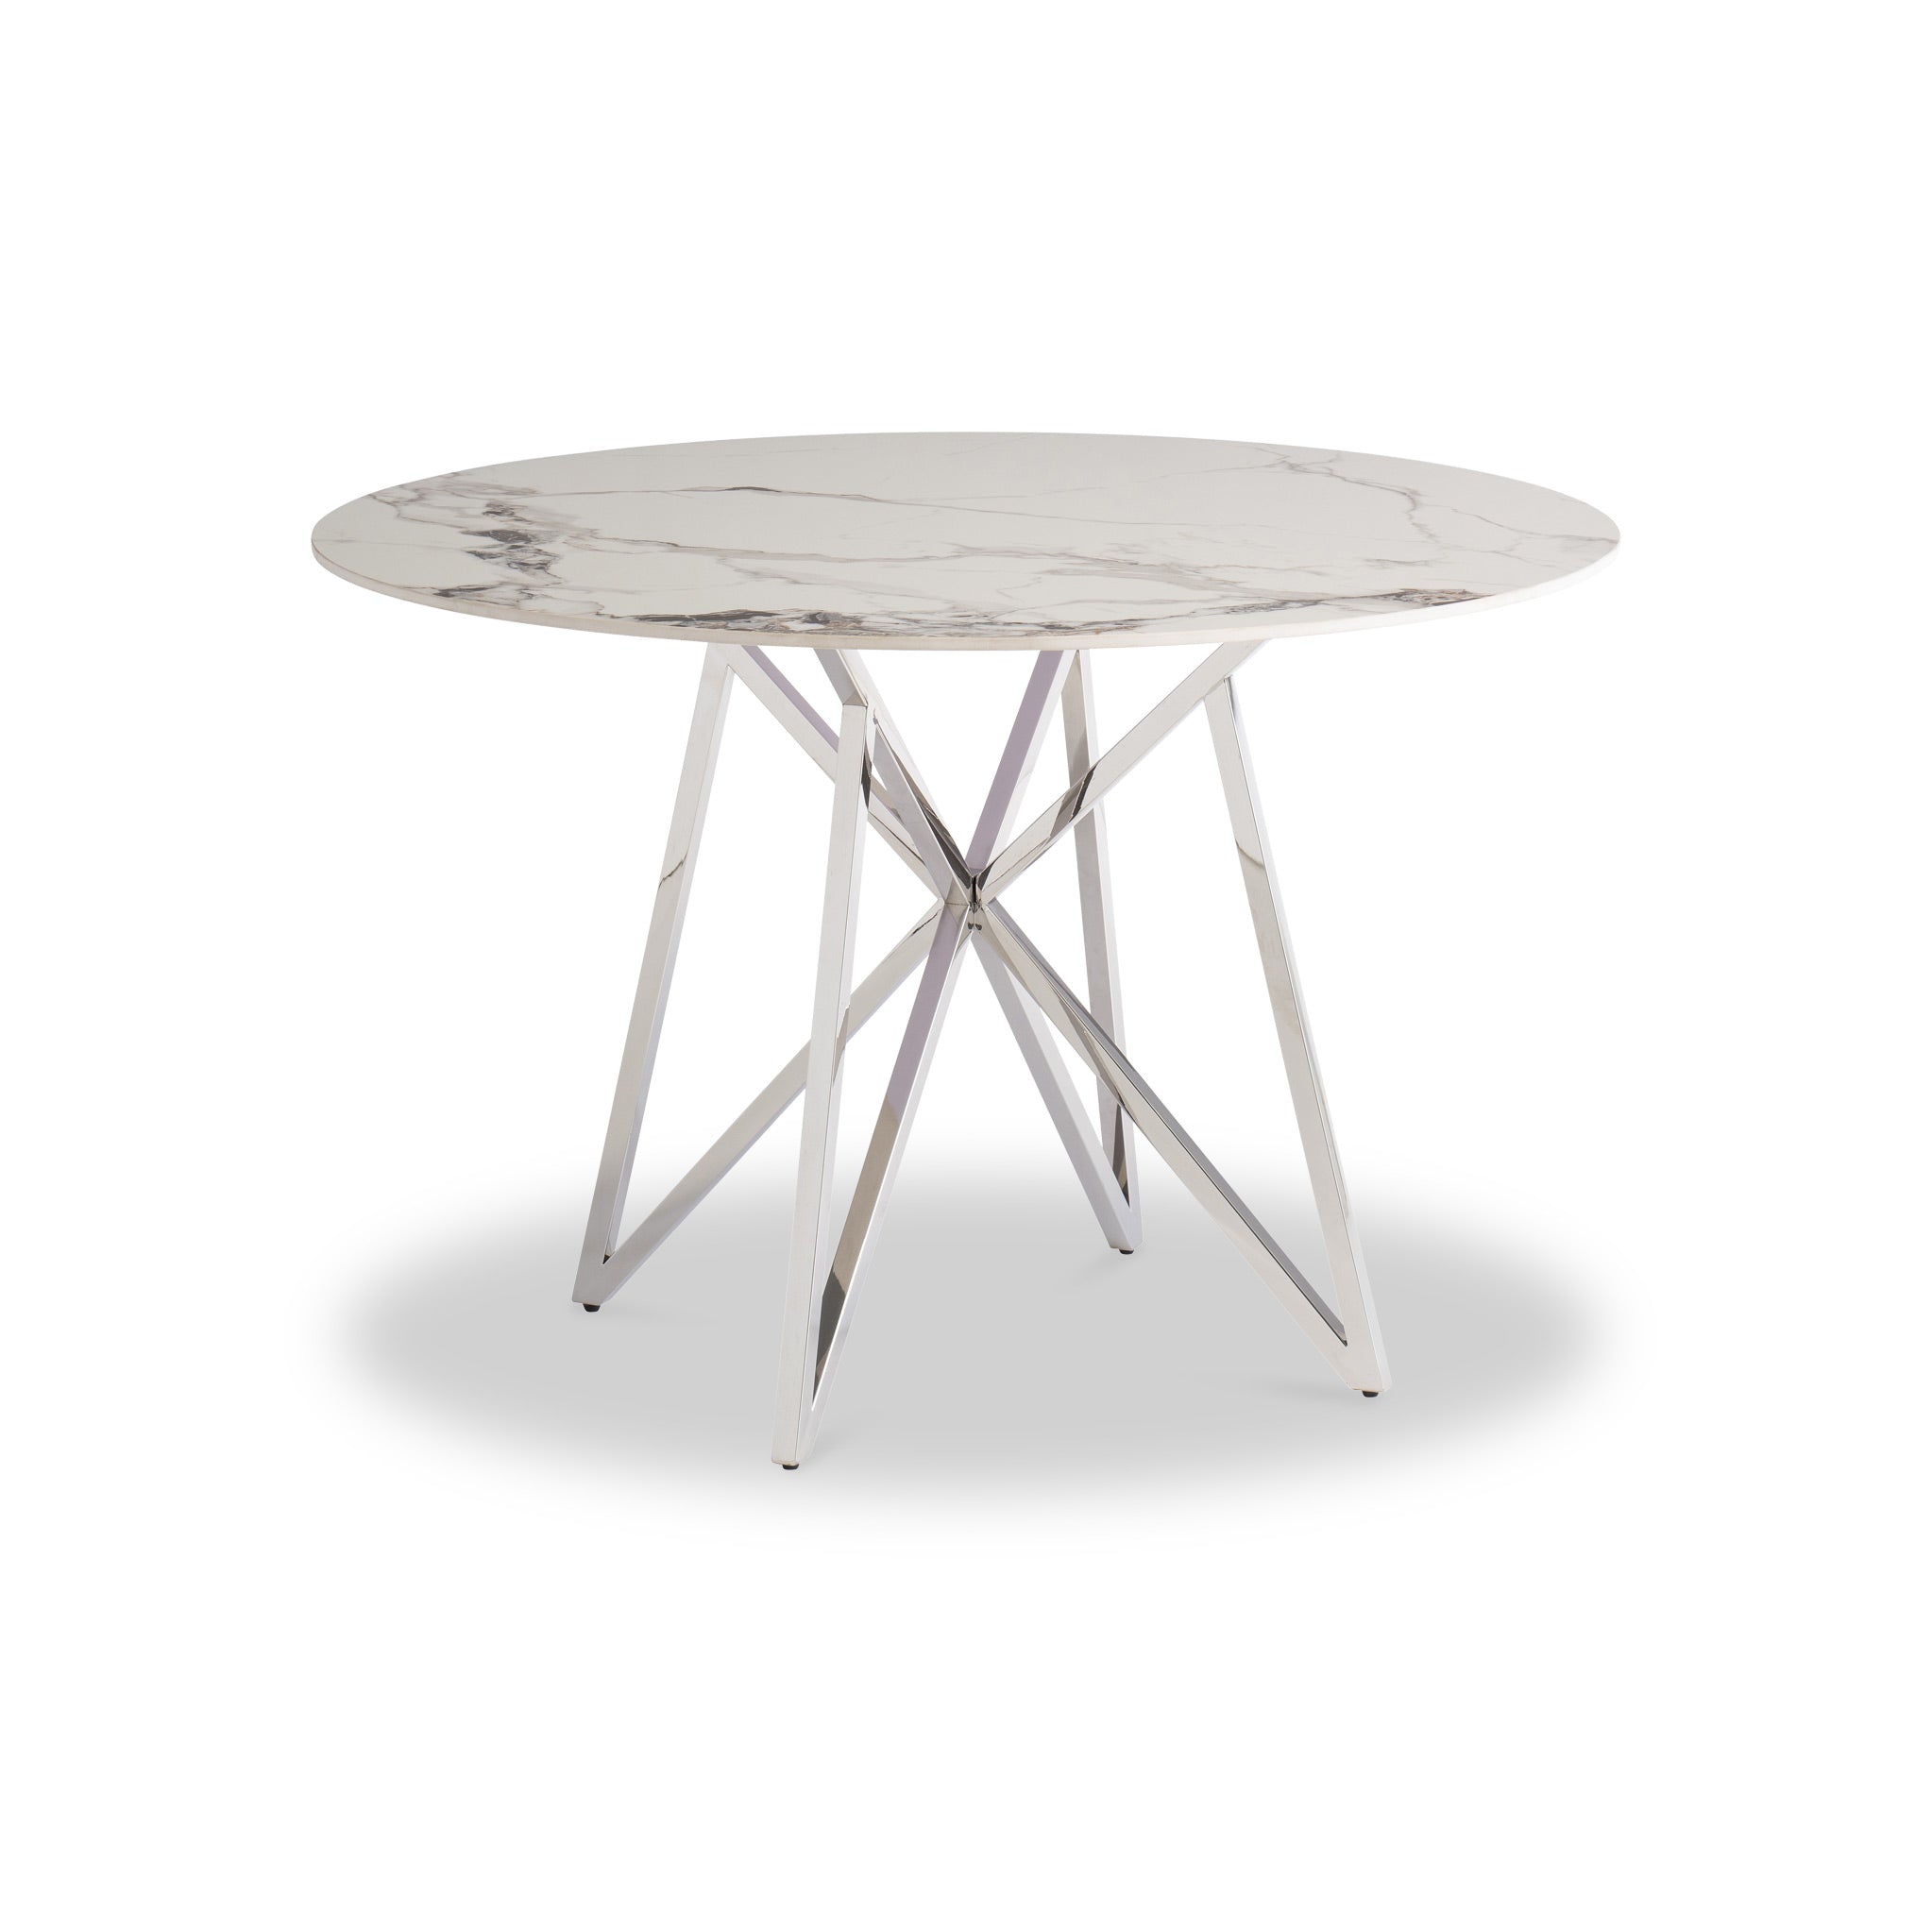 Carla White 120cm Sintered Stone Round Dining Table For 4